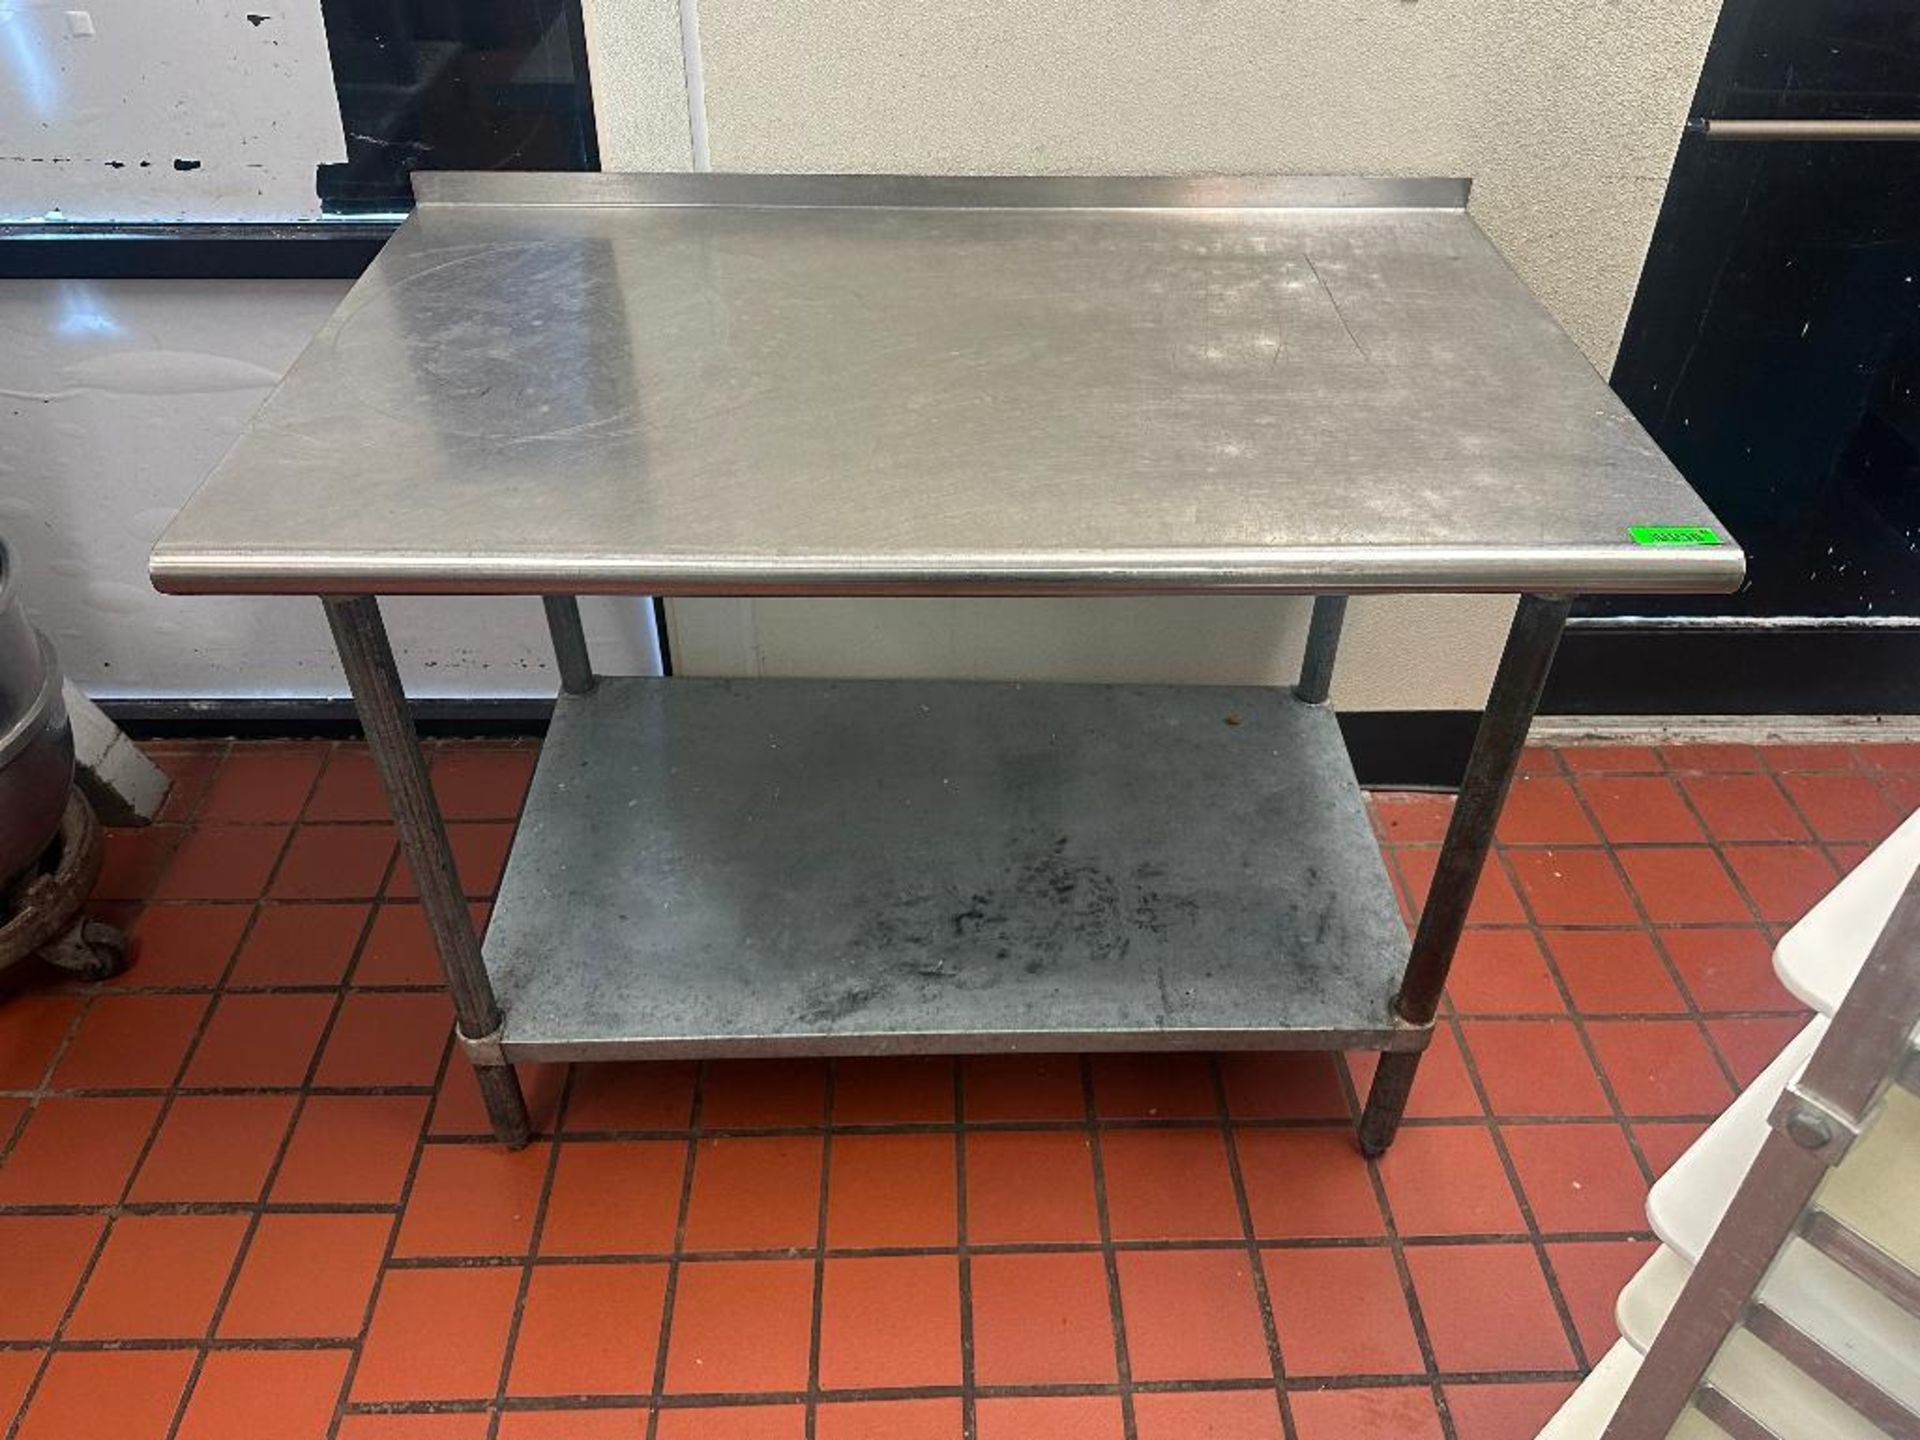 DESCRIPTION 48 "X 30" STAINLESS TABLE W/ 1" BACK SPLASH SIZE 48 "X 30" LOCATION 7399 O'Connor Drive,